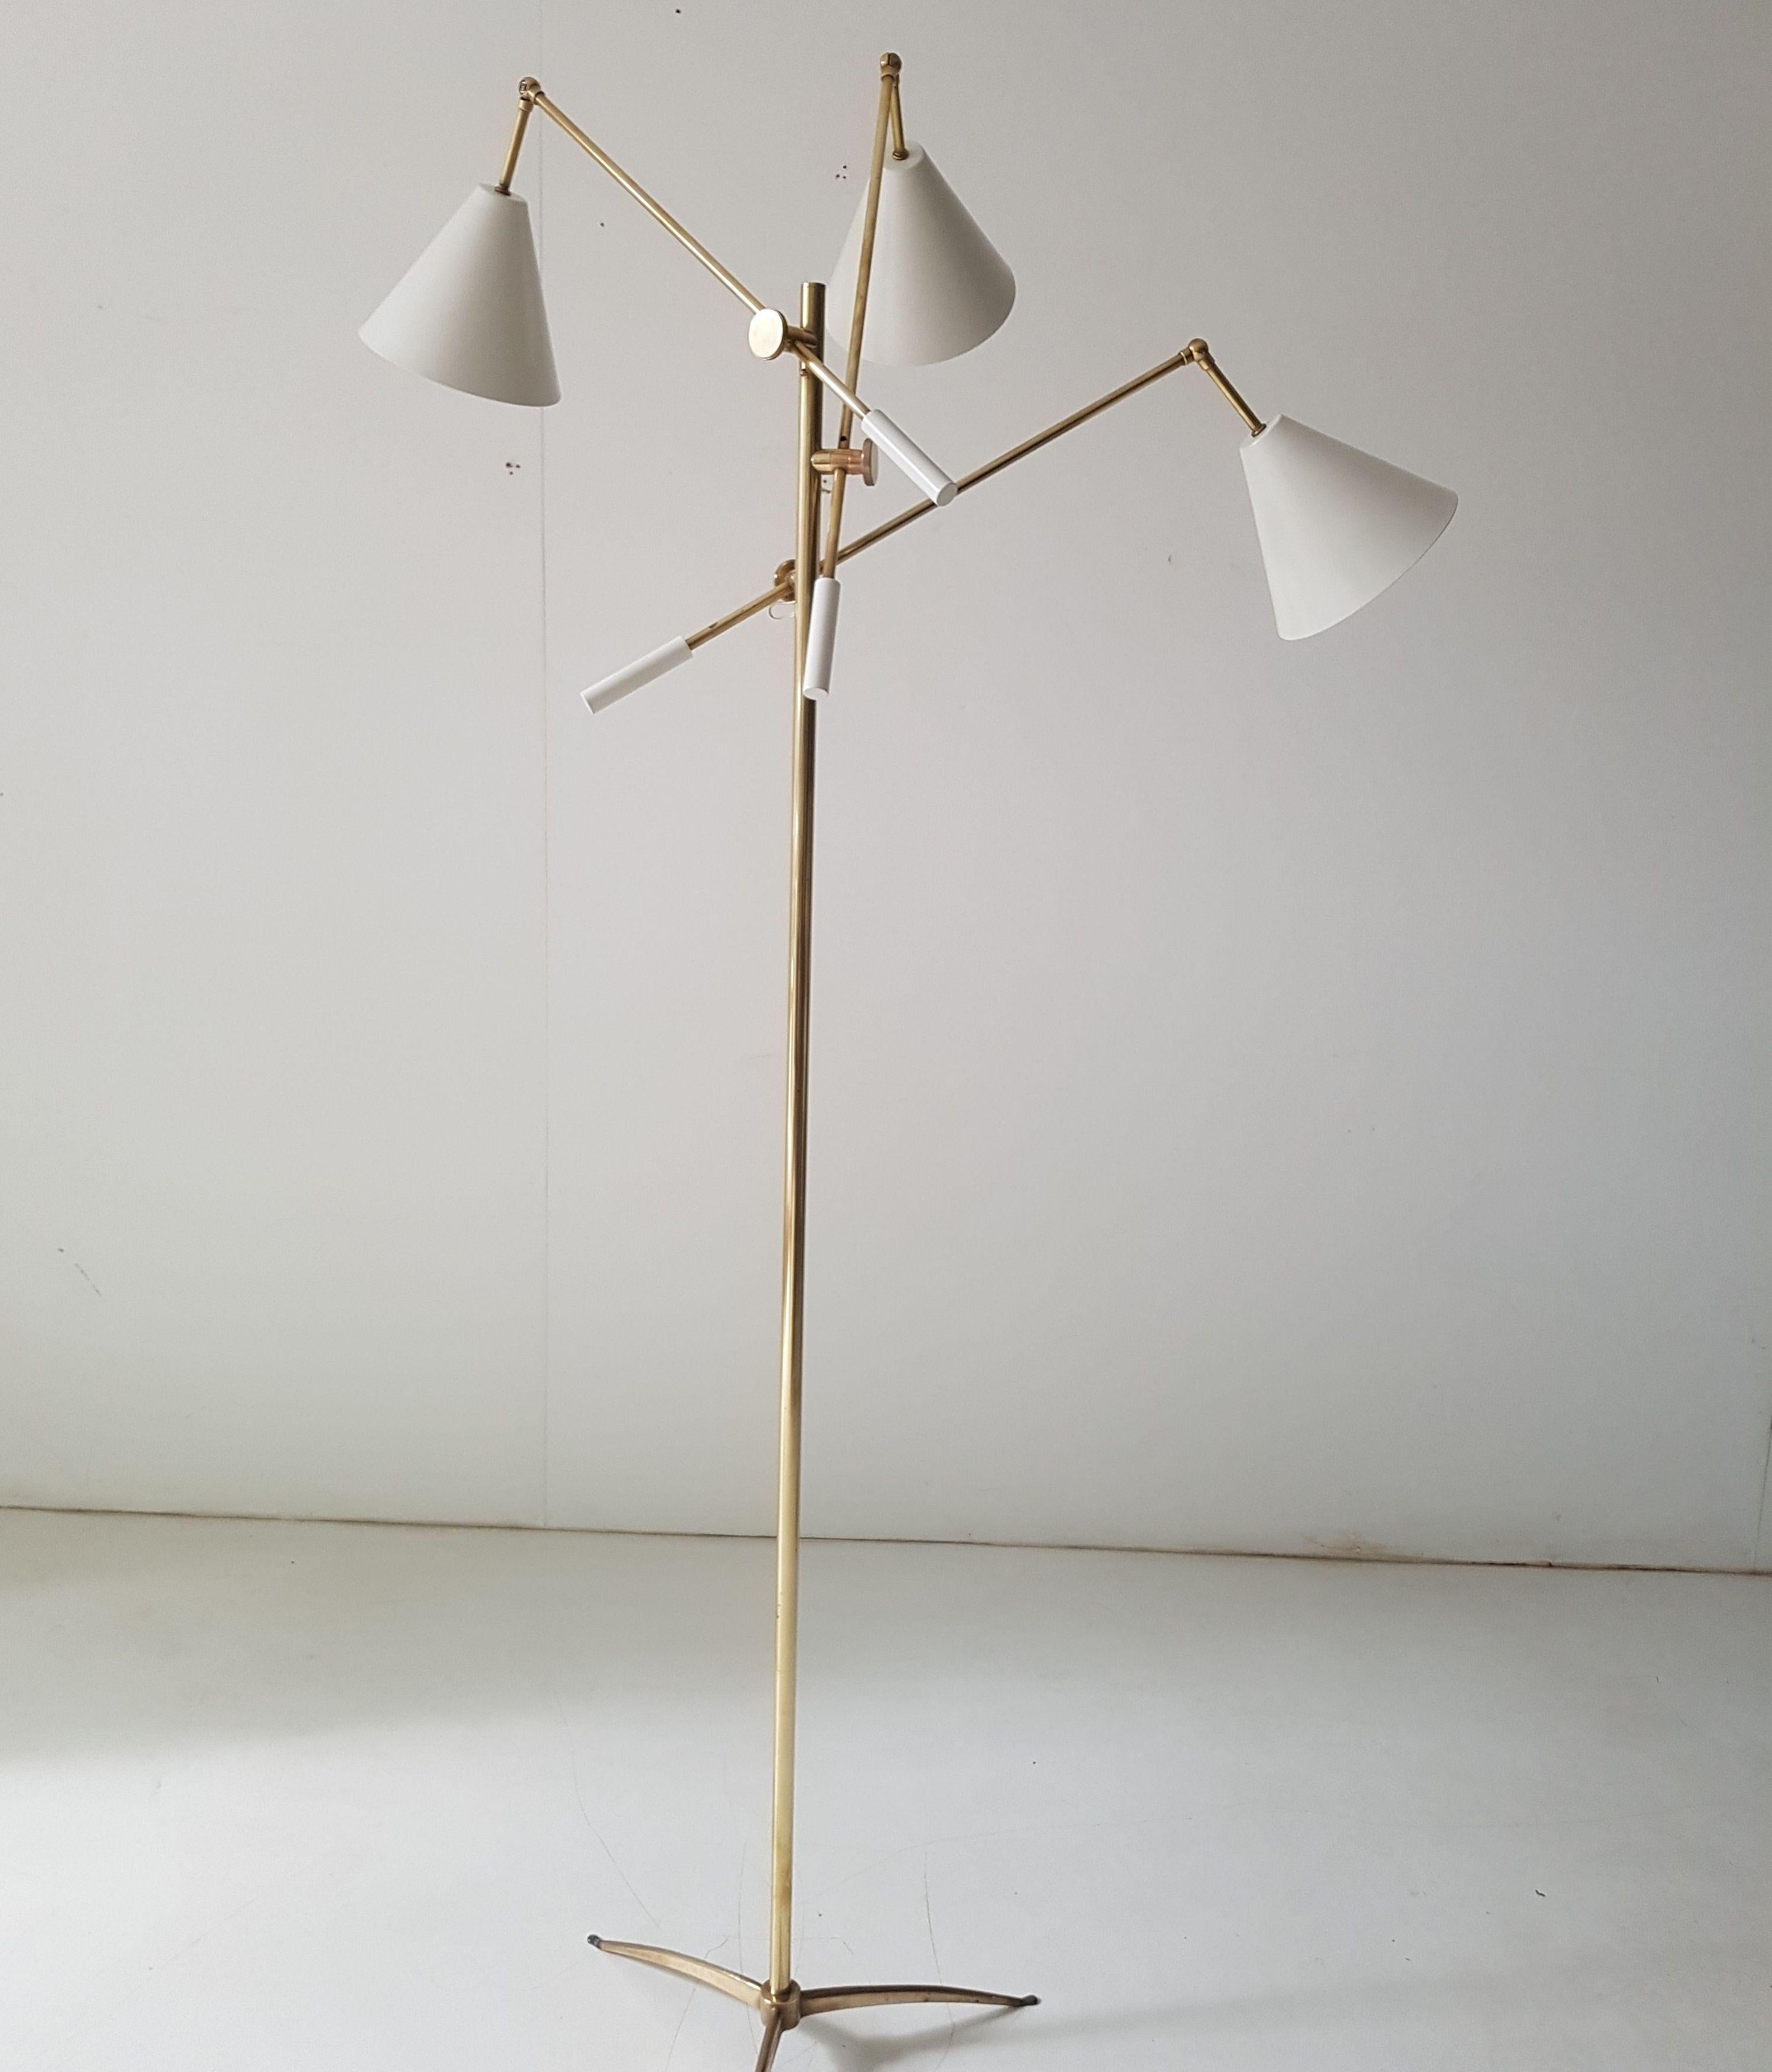 Brass floor lamp with tripod base, with articulated lacquered aluminium shades. The arms are also articulated.